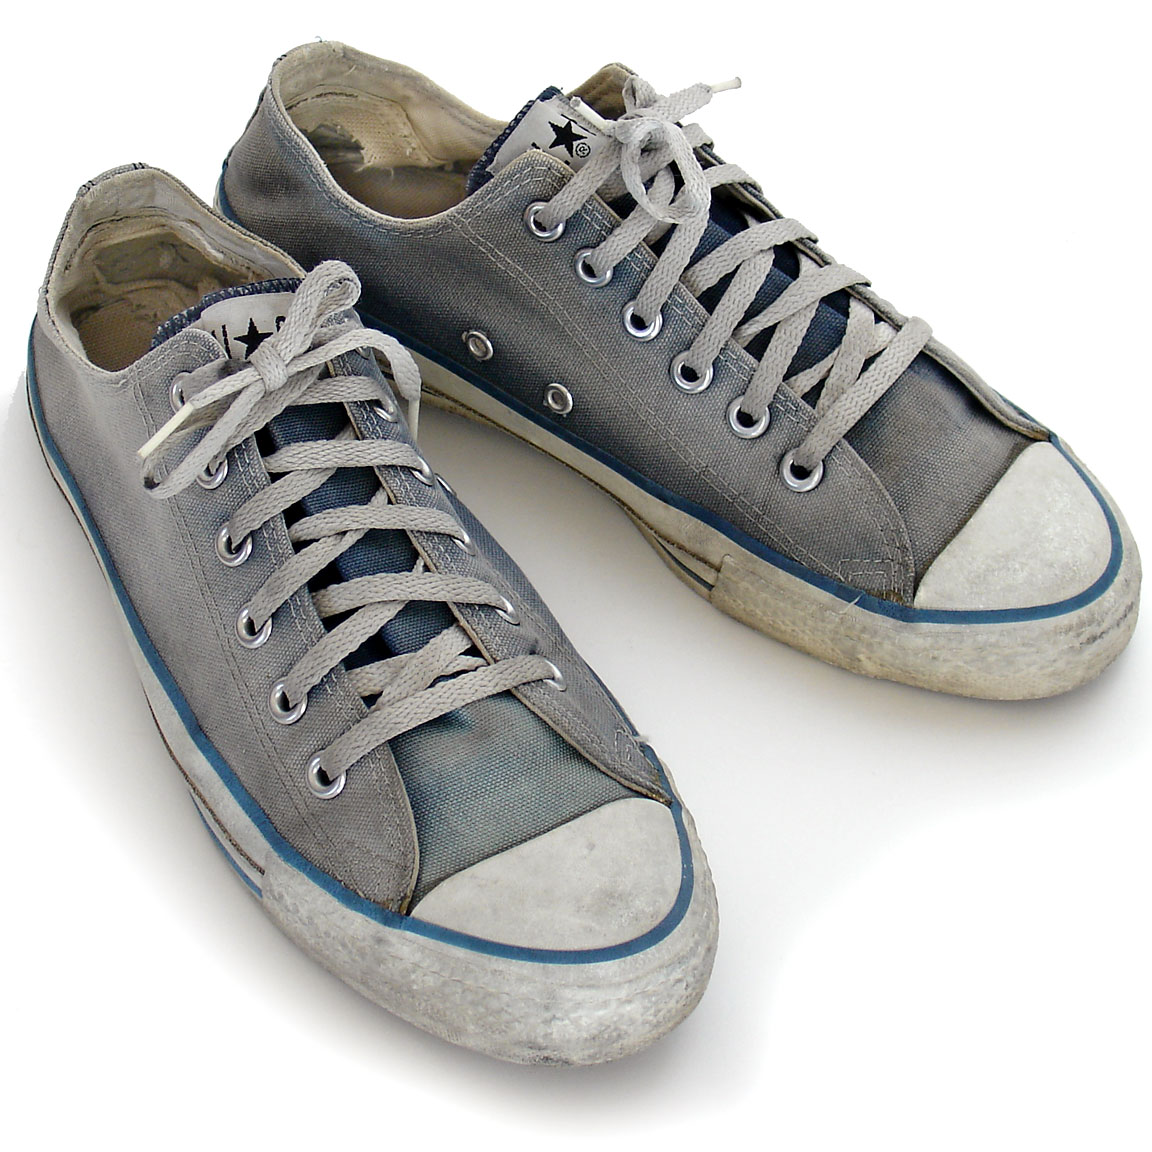 Vintage American-made Converse All Star Chuck Taylor faded denim shoes for sale at http://www.collectornet.net/shoes